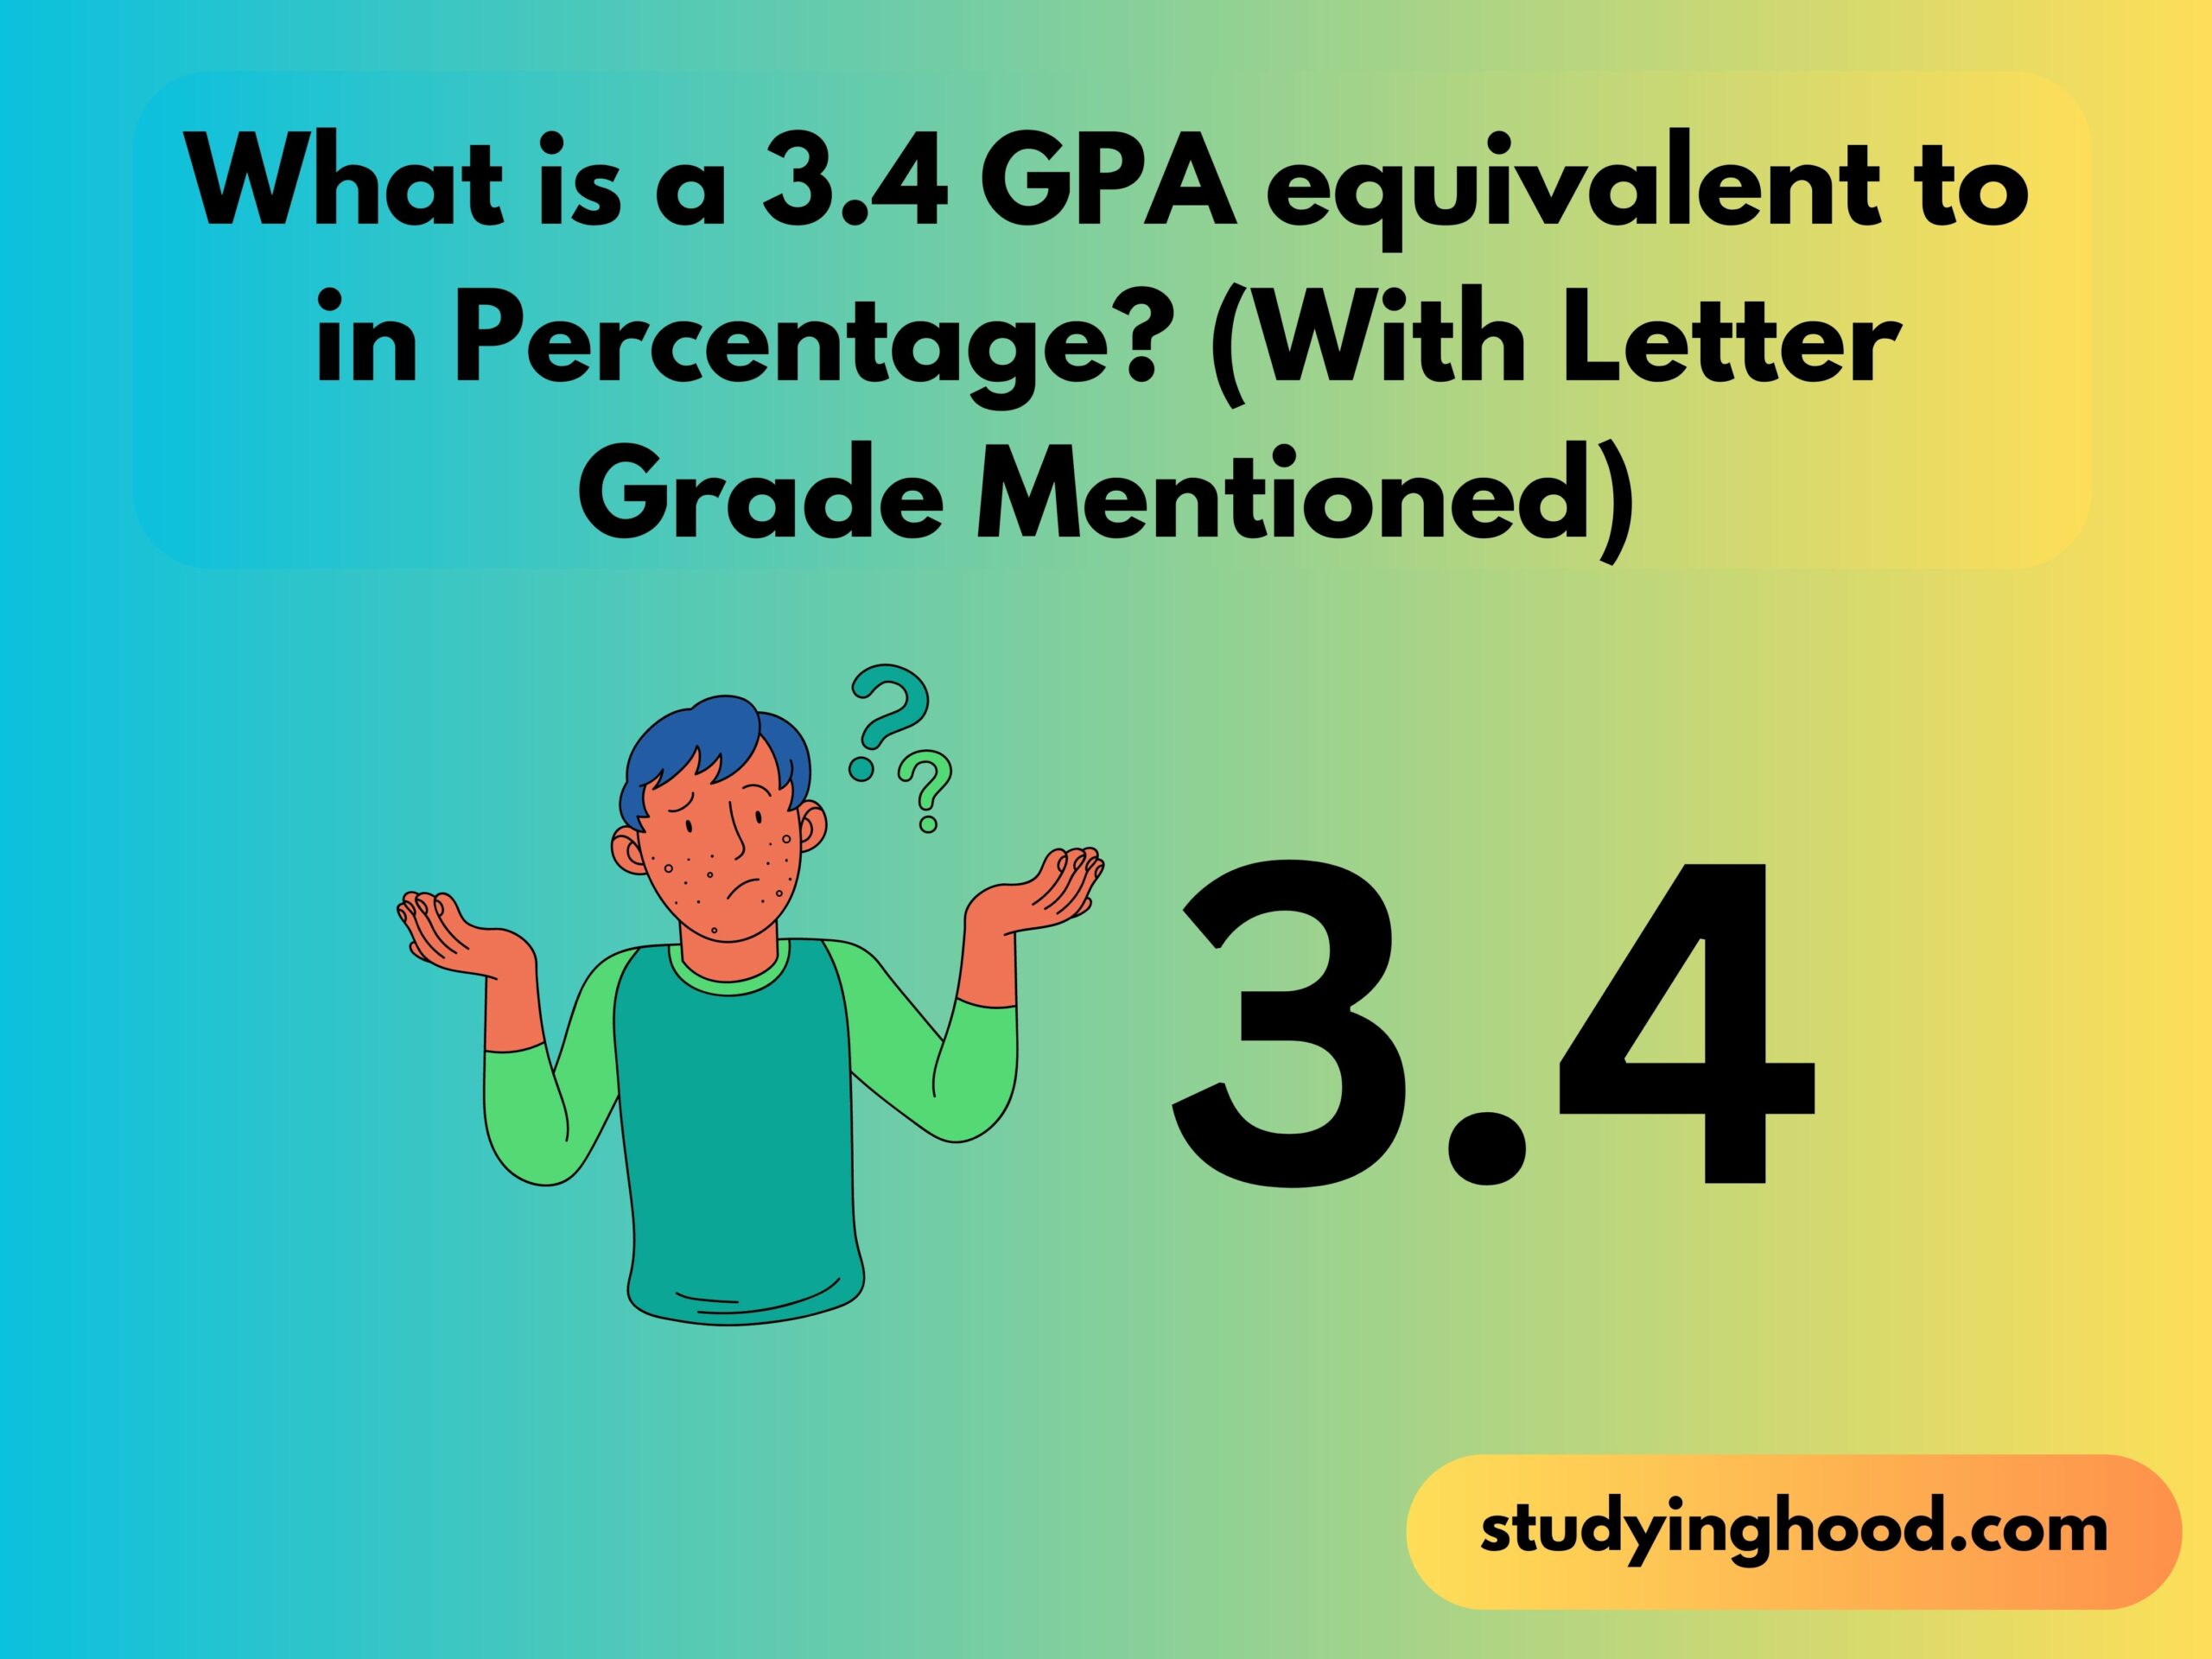 What is a 3.4 GPA equivalent to in Percentage (With Letter Grade Mentioned)